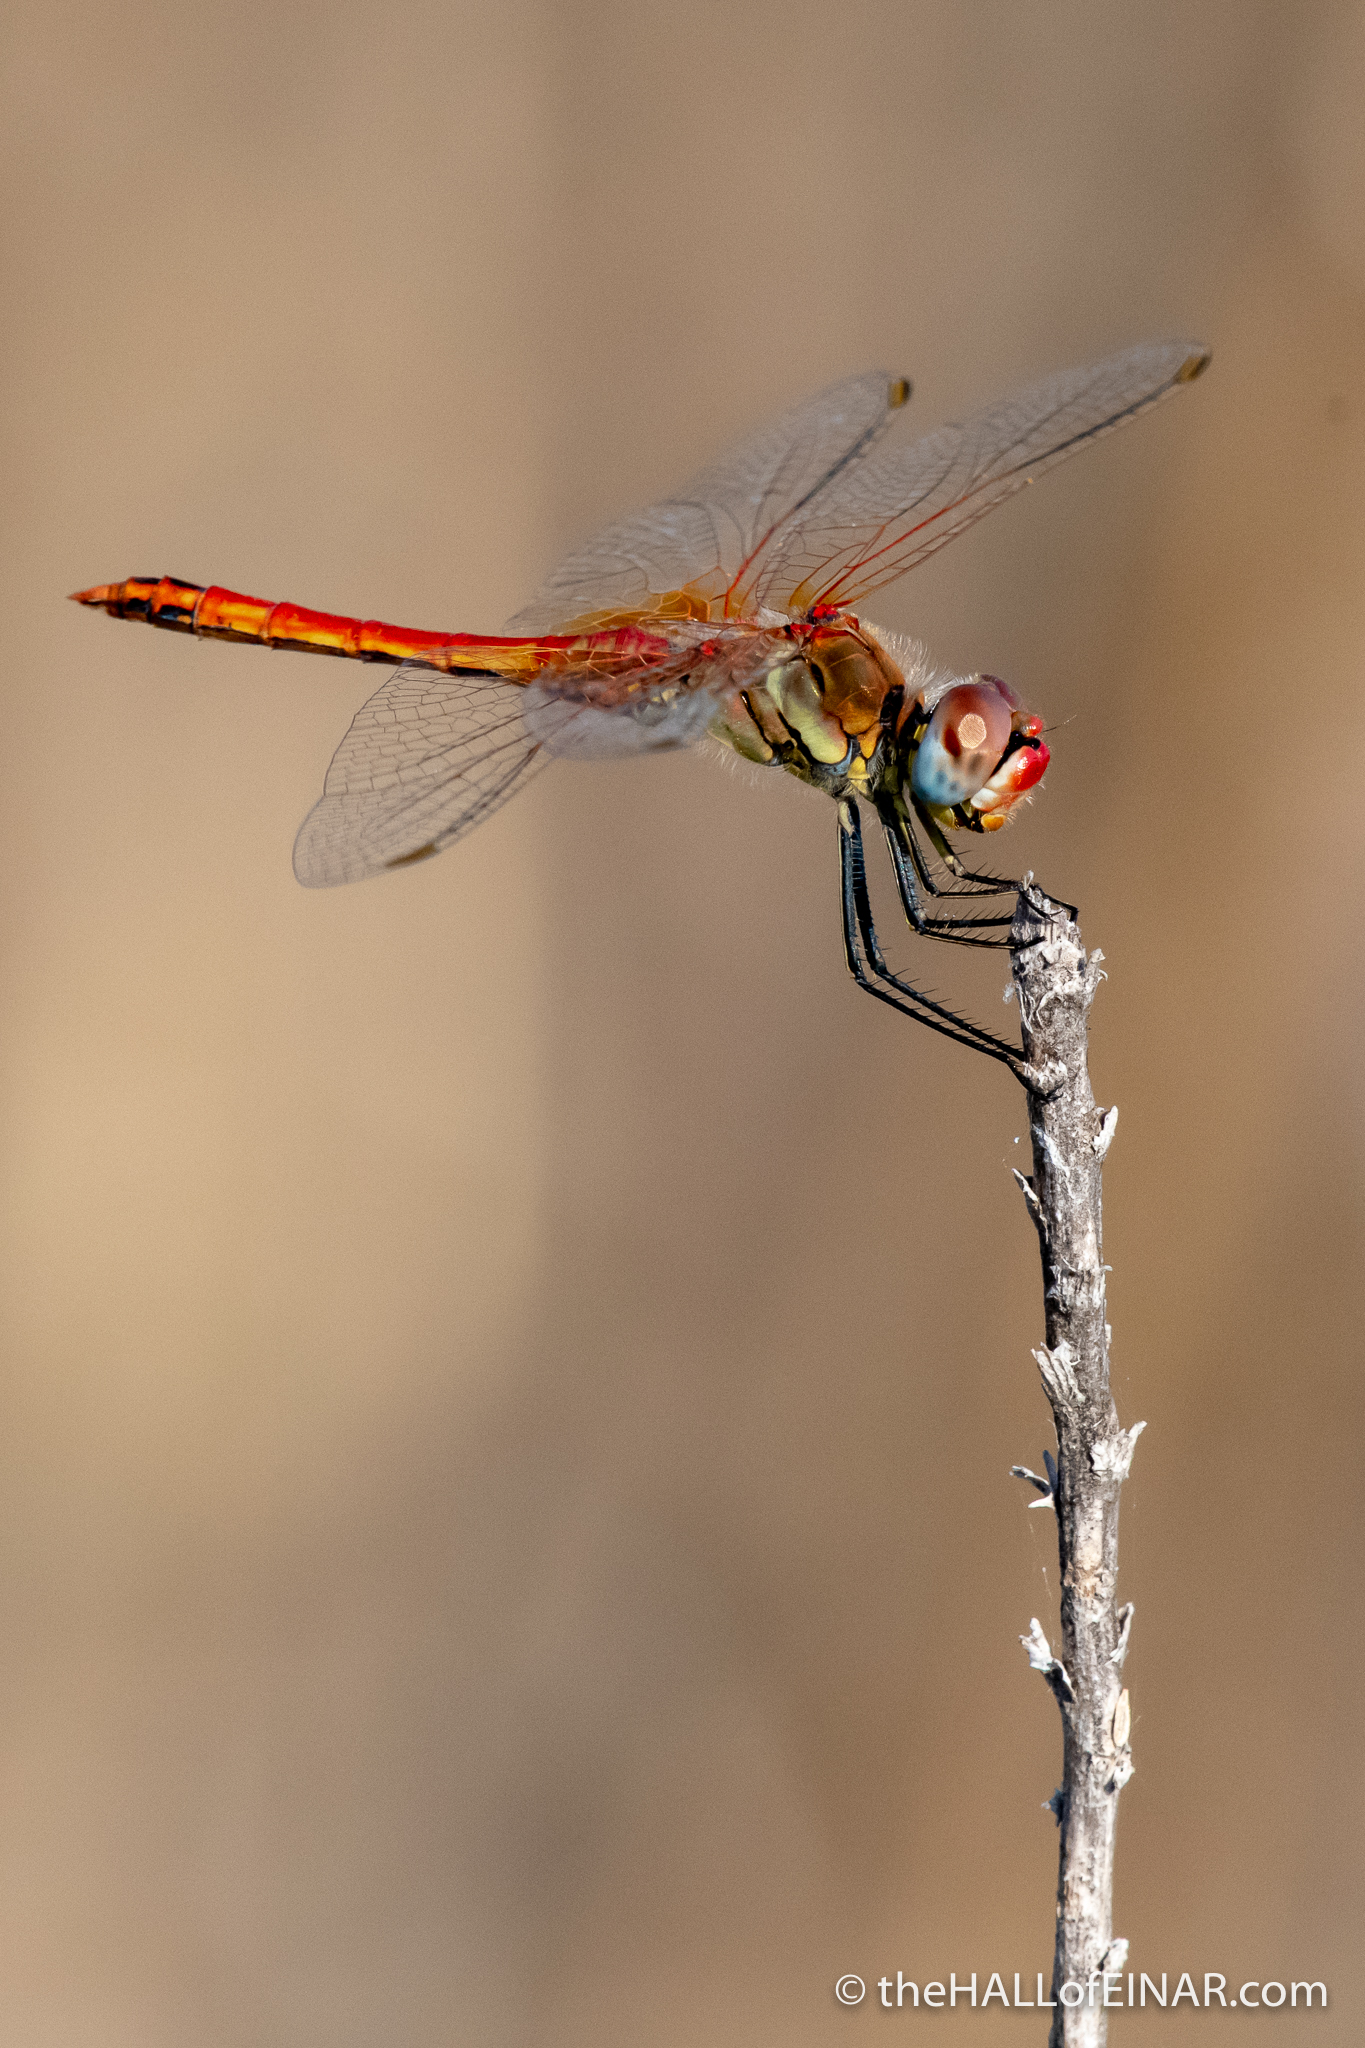 Red-Veined Darter Dragonfly - The Hall of Einar - photograph (c) David Bailey (not the)